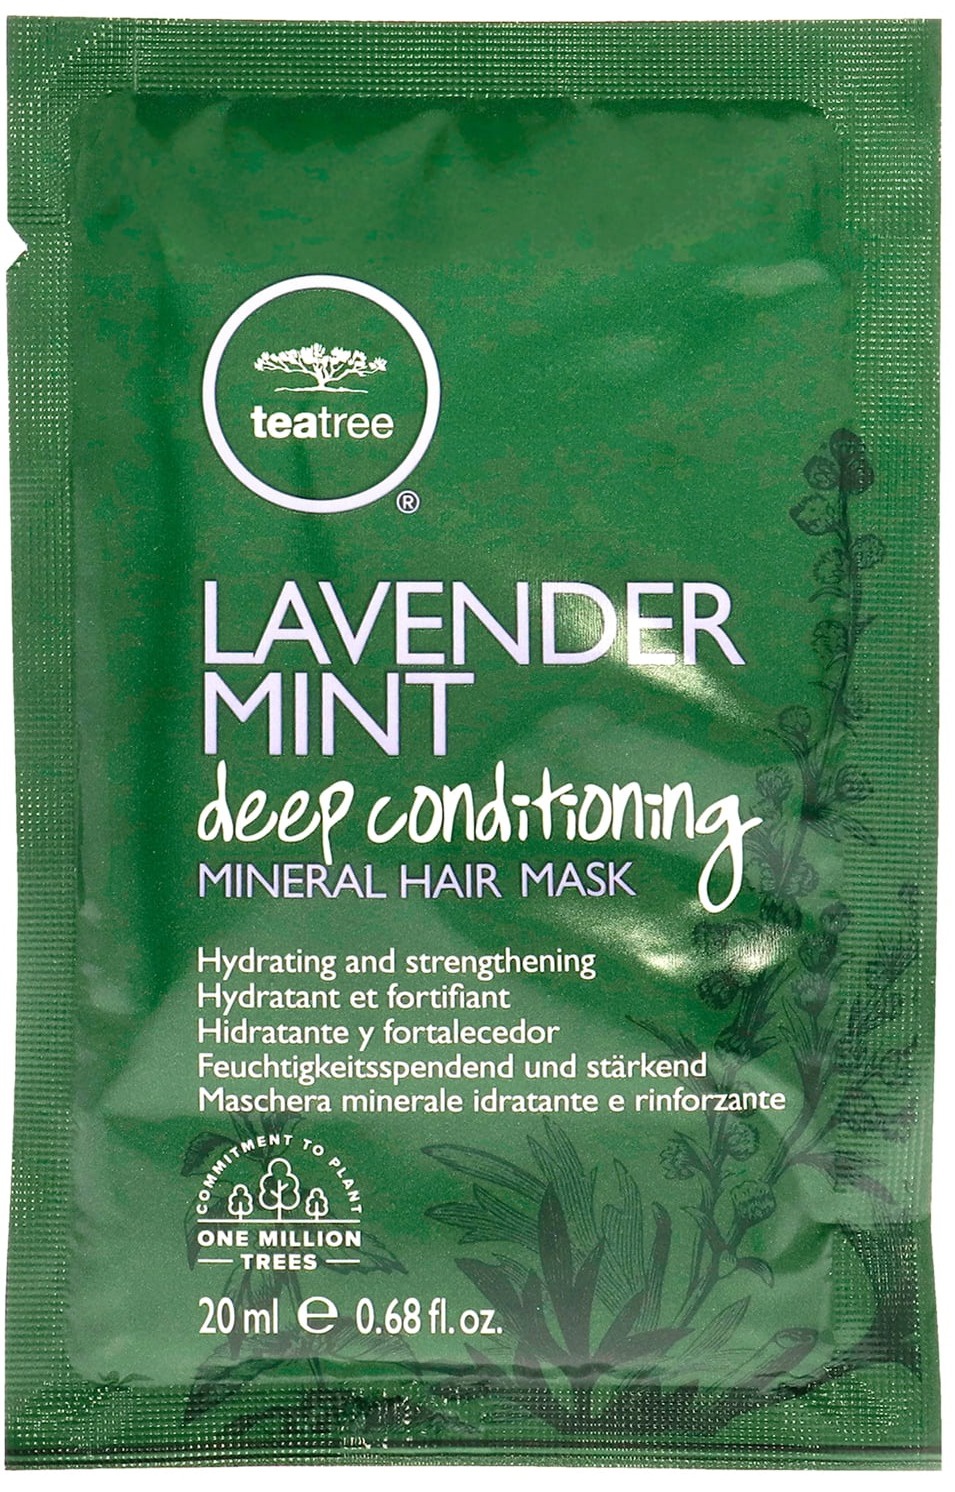 Paul Mitchell Lavender Mint Deep Conditioning Mineral Hair Mask